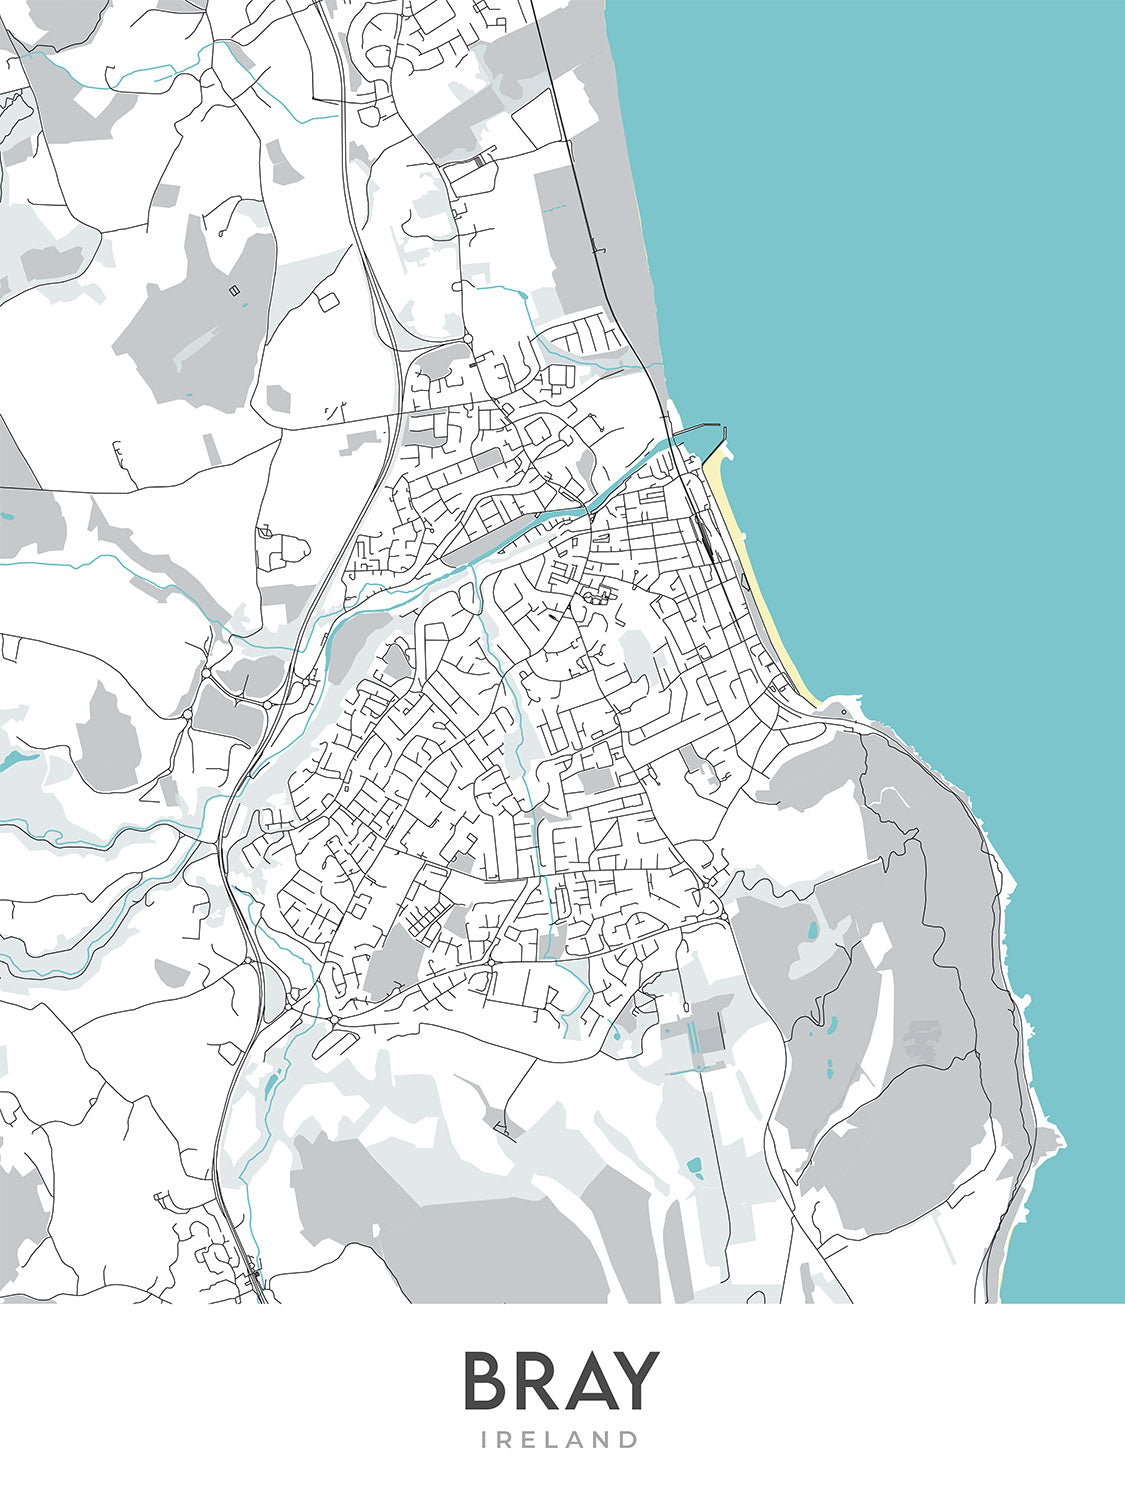 Modern Town Map of Bray, Ireland: Bray Head, Bray Harbour, Bray Head Nature Reserve, N11, R117